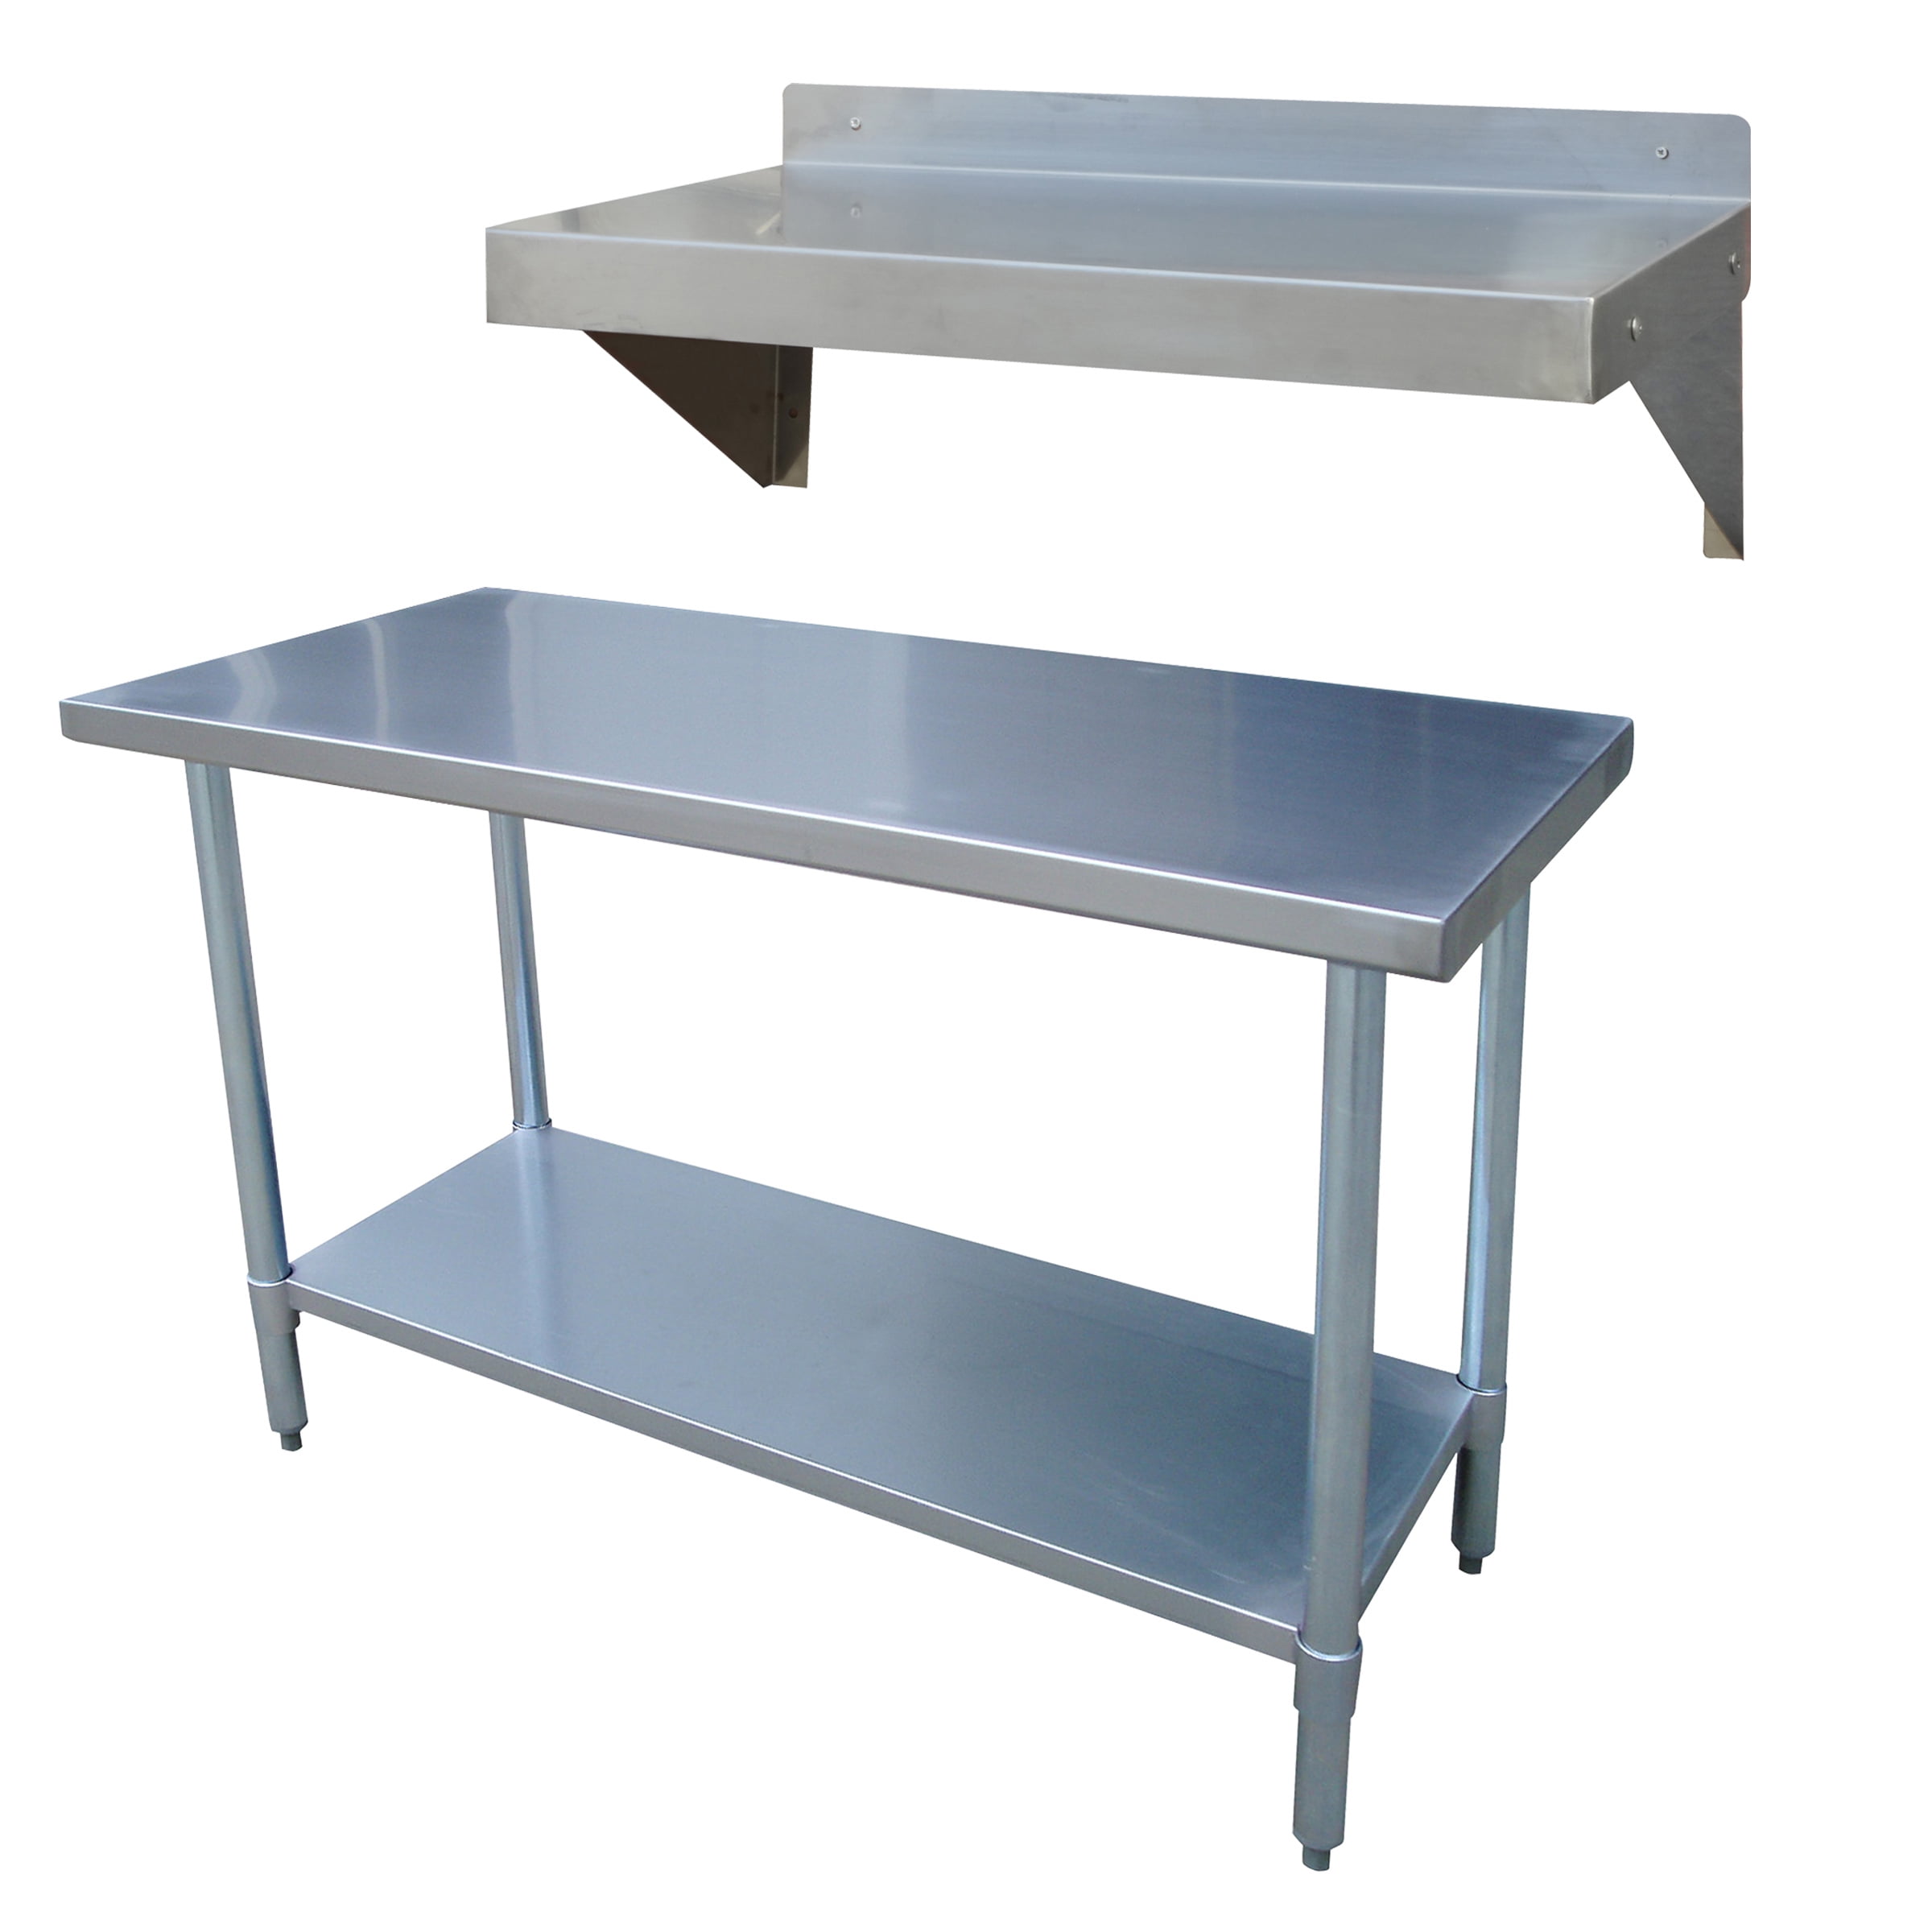 Sportsman Series Stainless Steel Table and Shelf Set